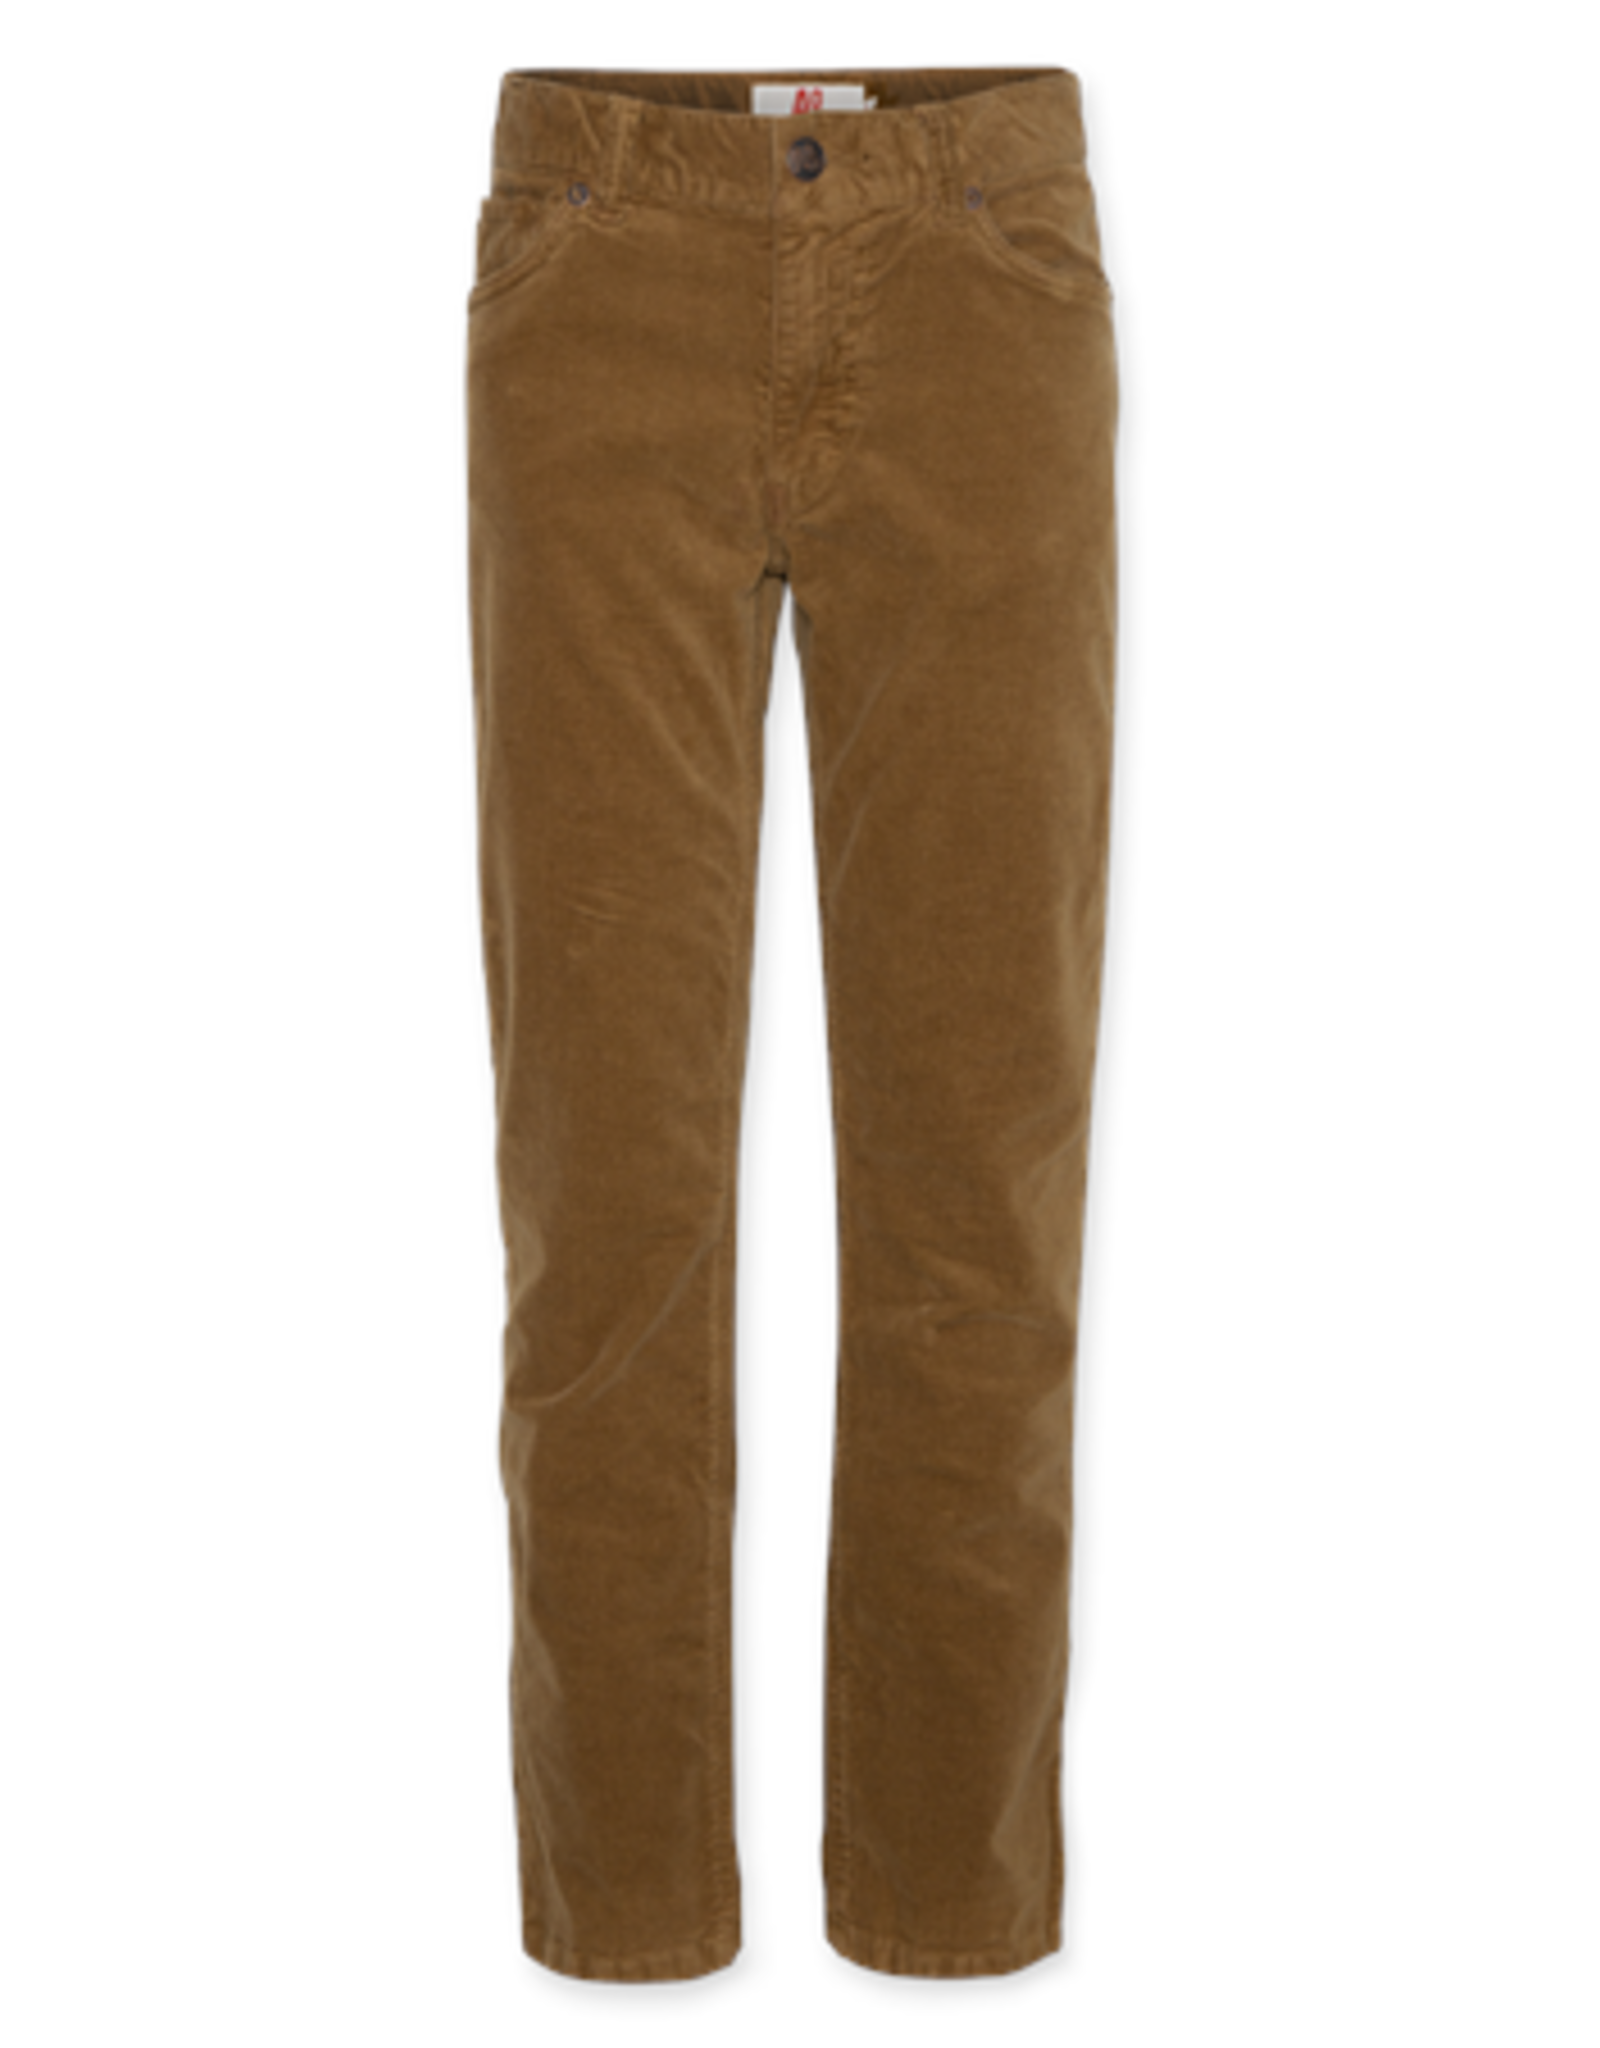 AMERICAN OUTFITTERS Ao76 Adam 5-pocket cord pants